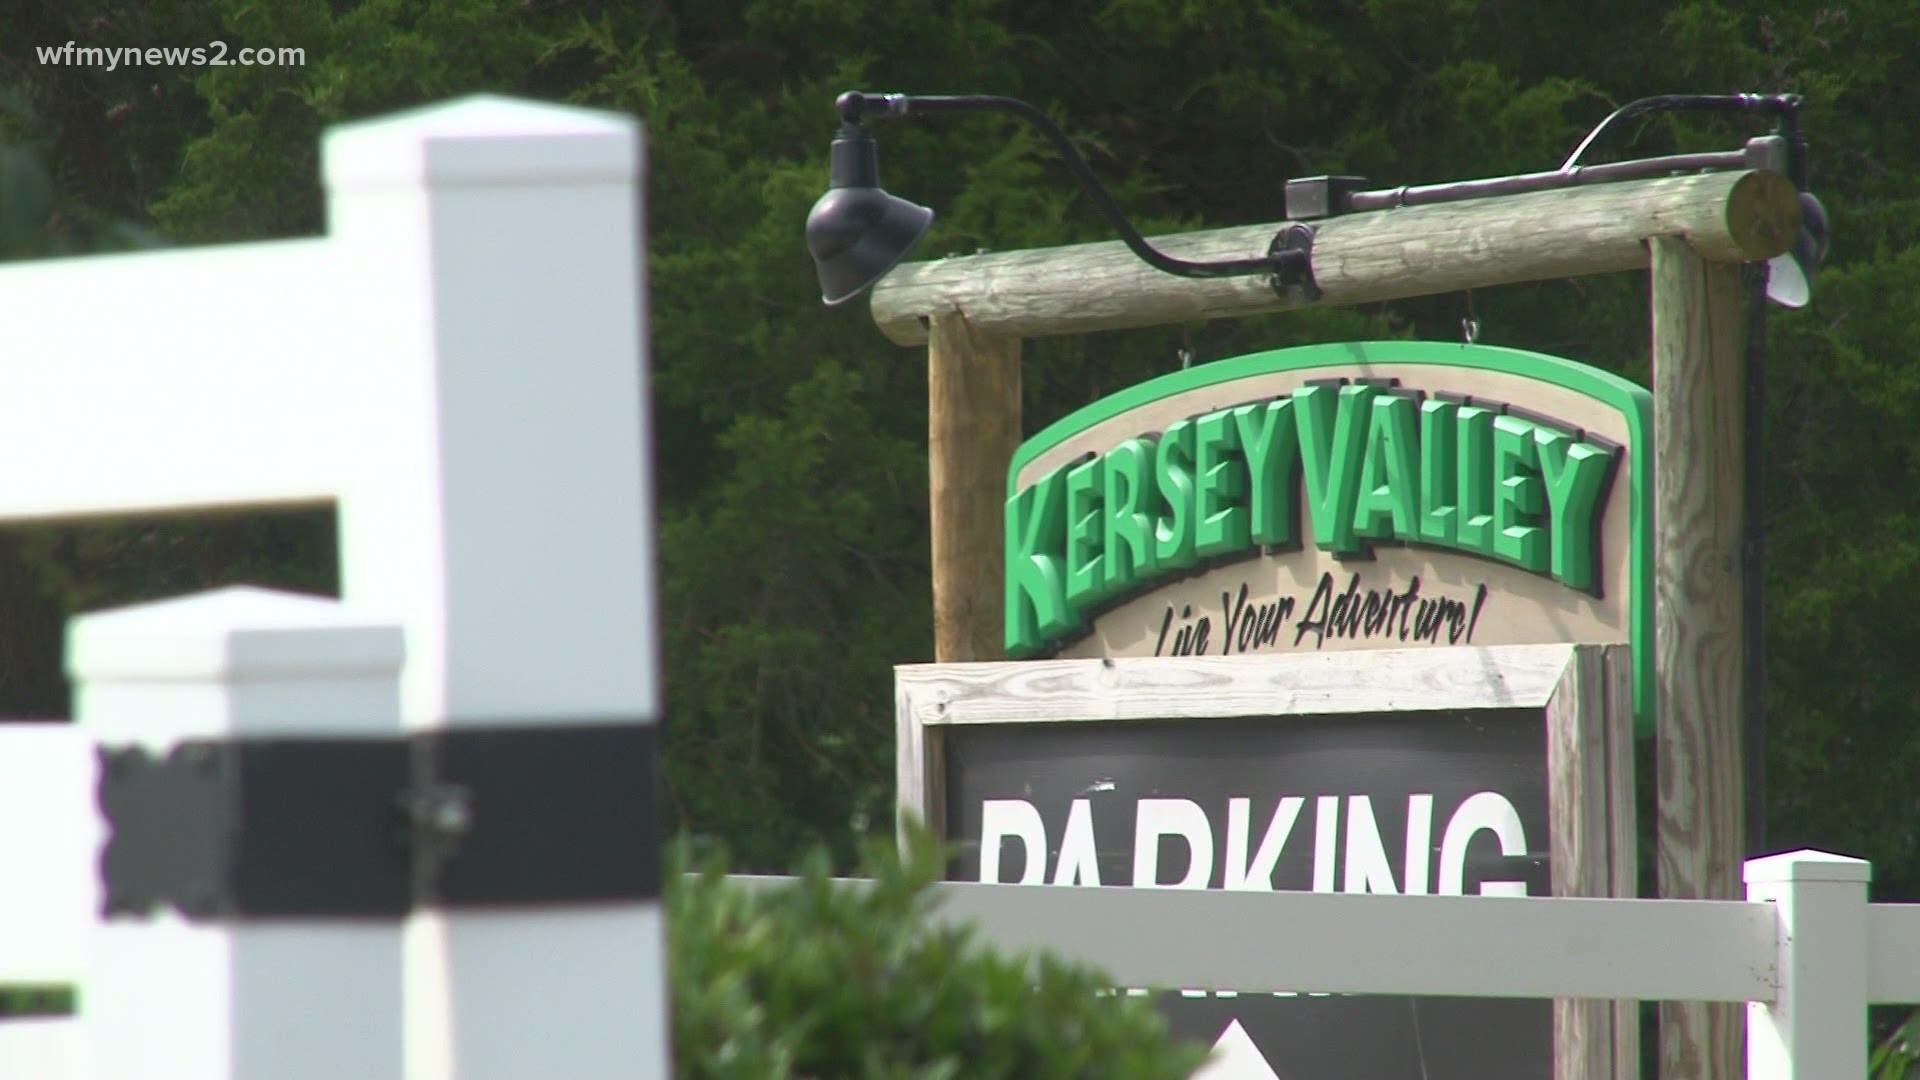 Kersey Valley Attractions and Millstone Creek Orchard came up with plans to safely bring back customers as the fall season started up.